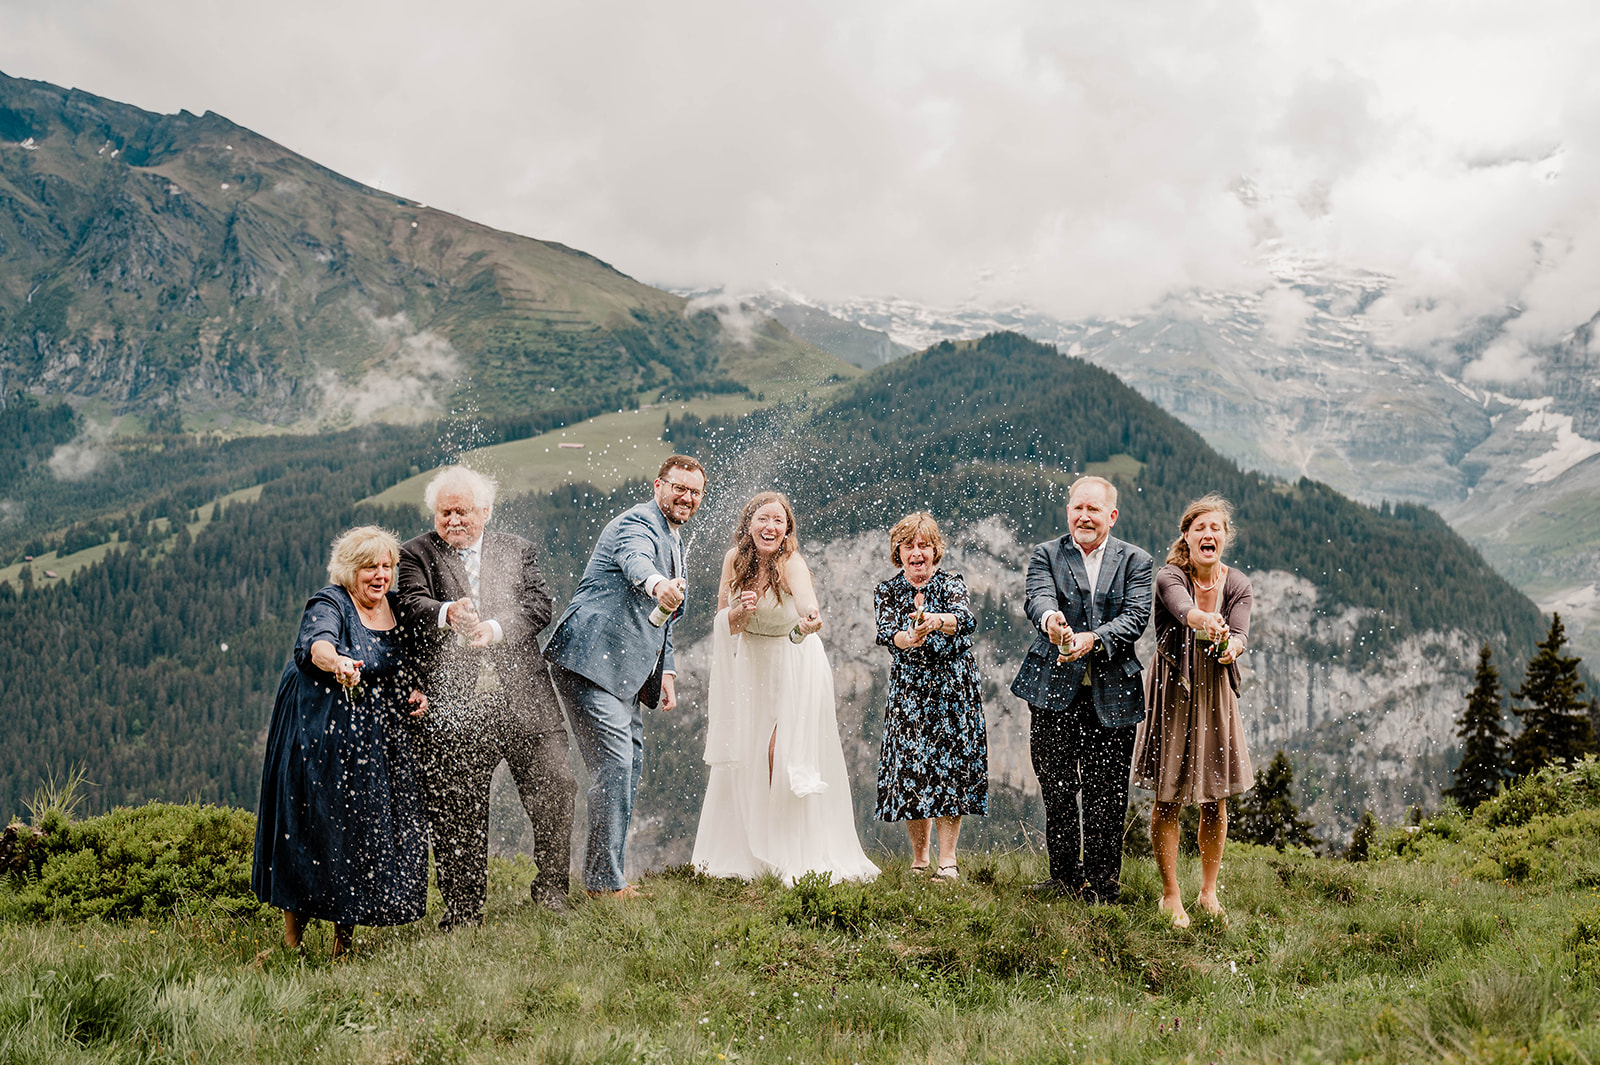 After an intimate elopement, family members and couple pop champagne above the Lauterbrunnen valley